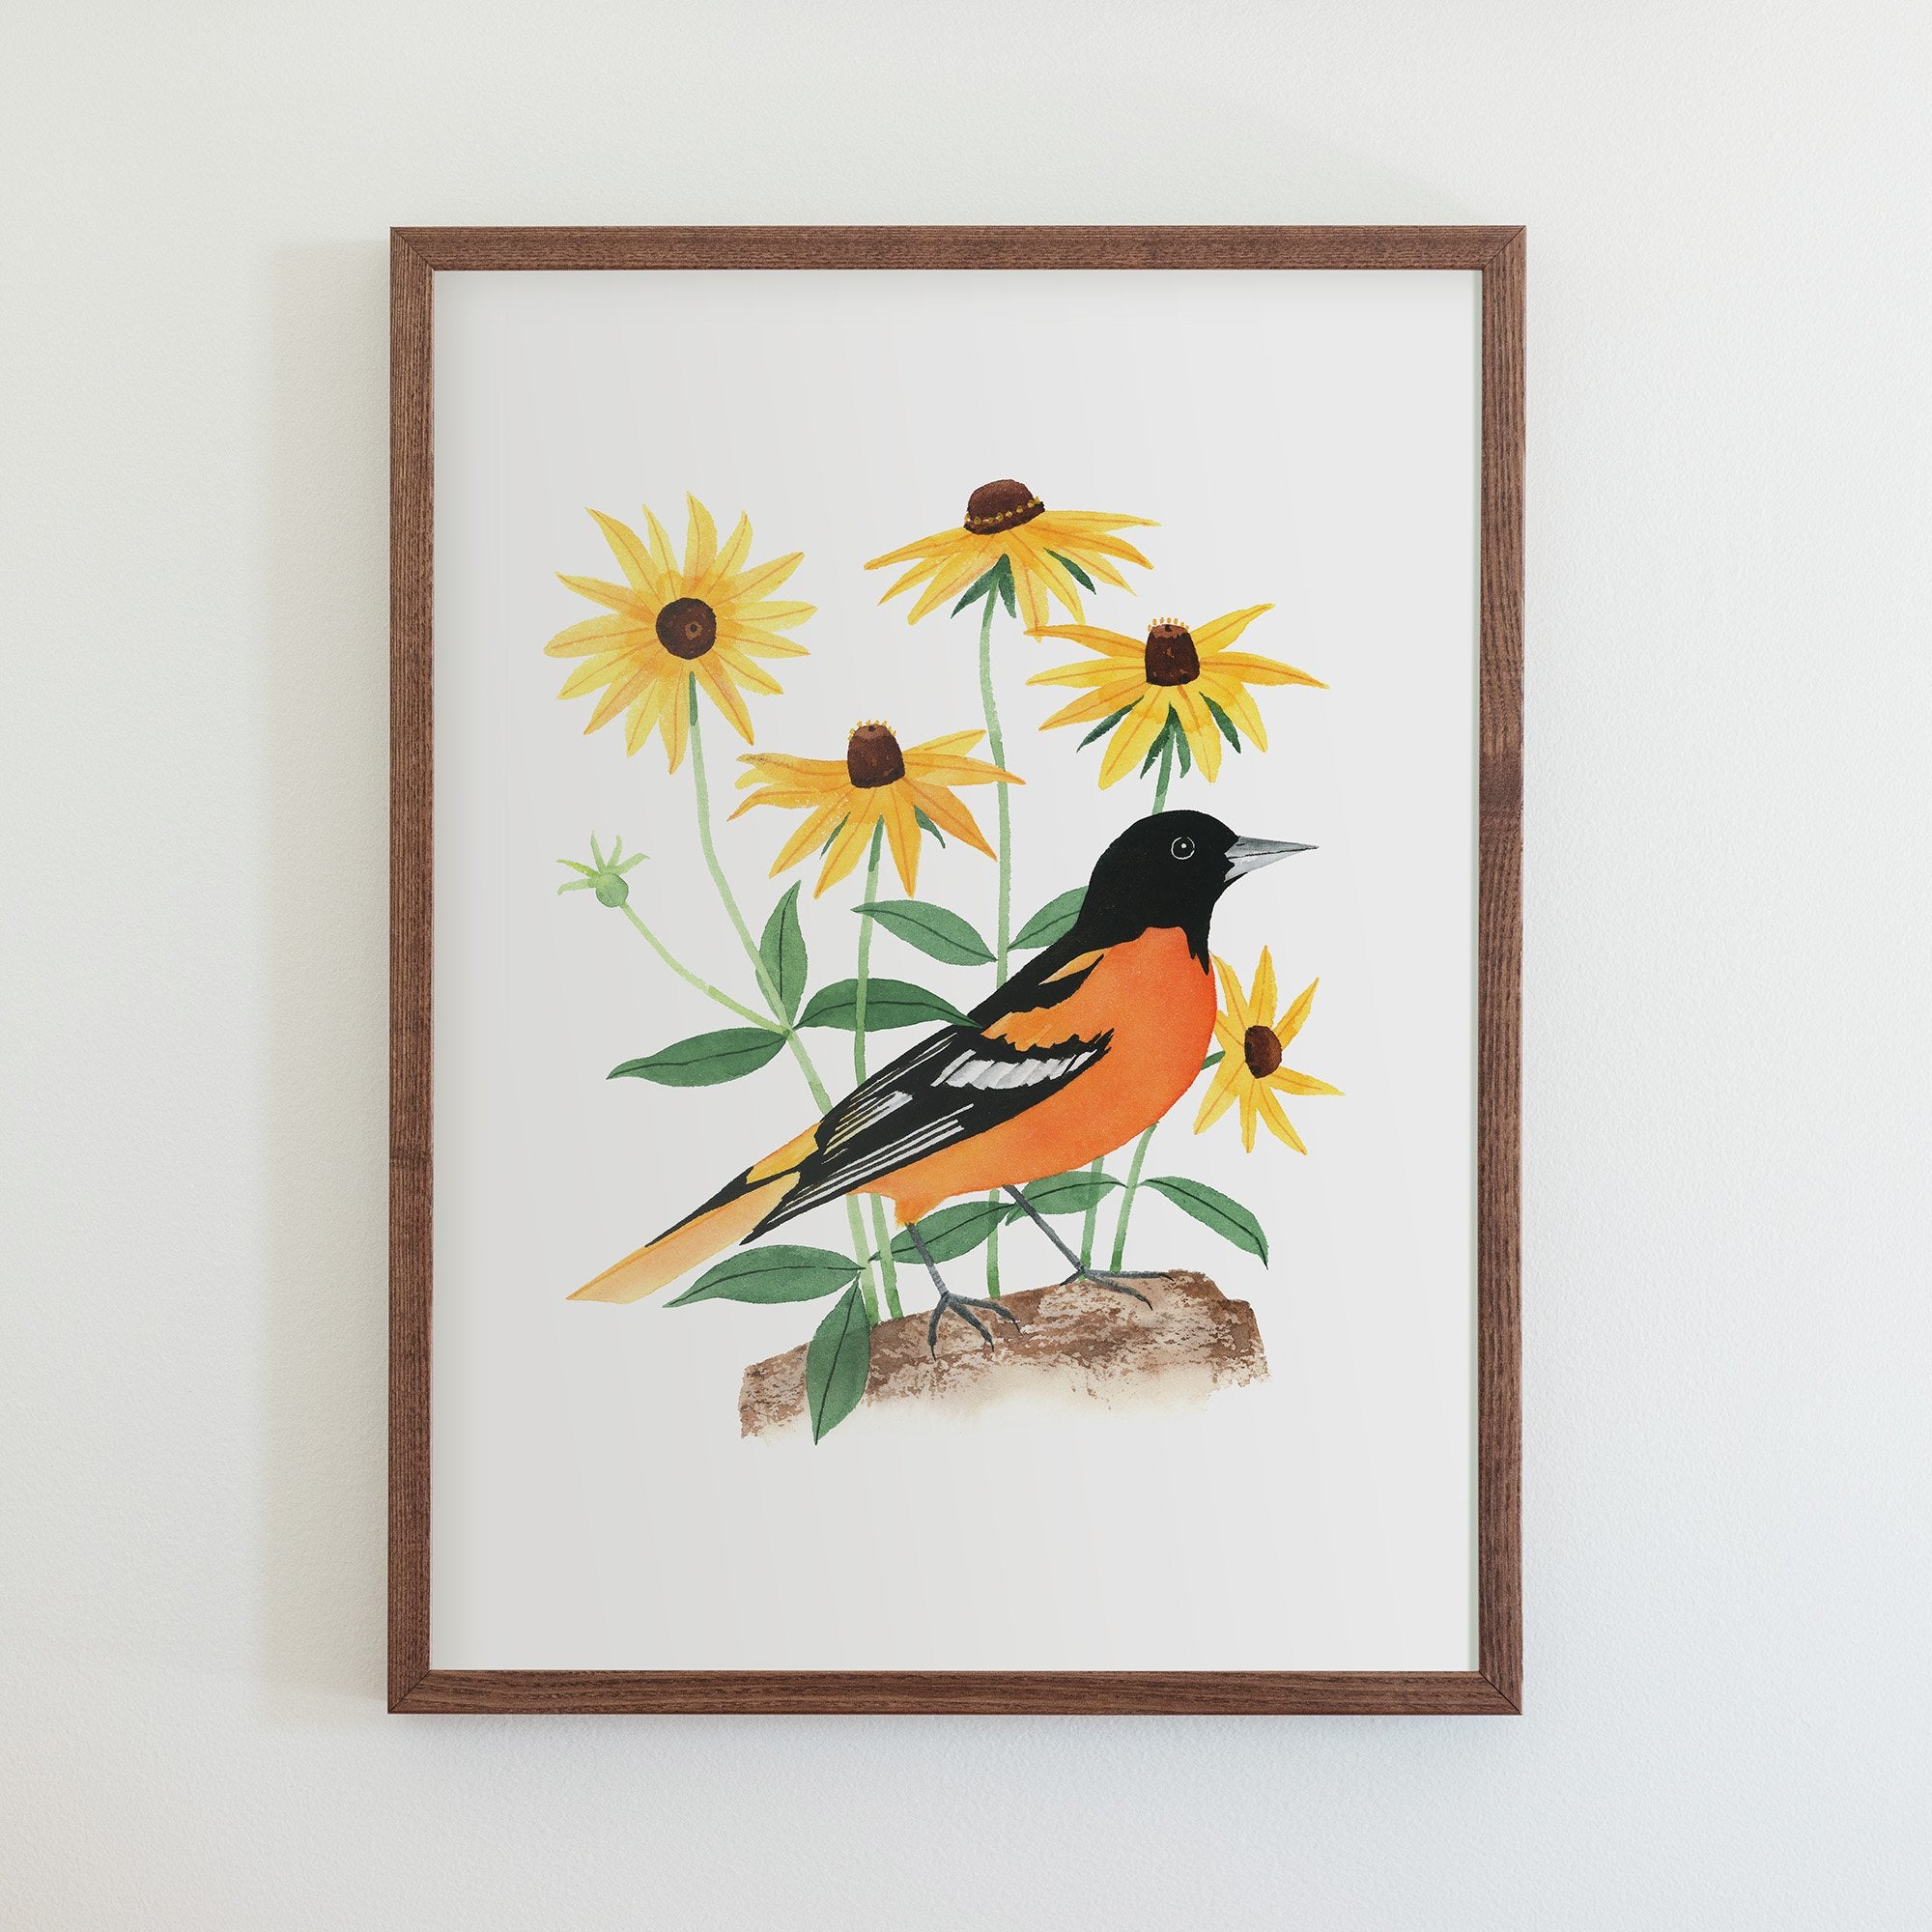  Vintage Oriole bird common in Baltimore Maryland